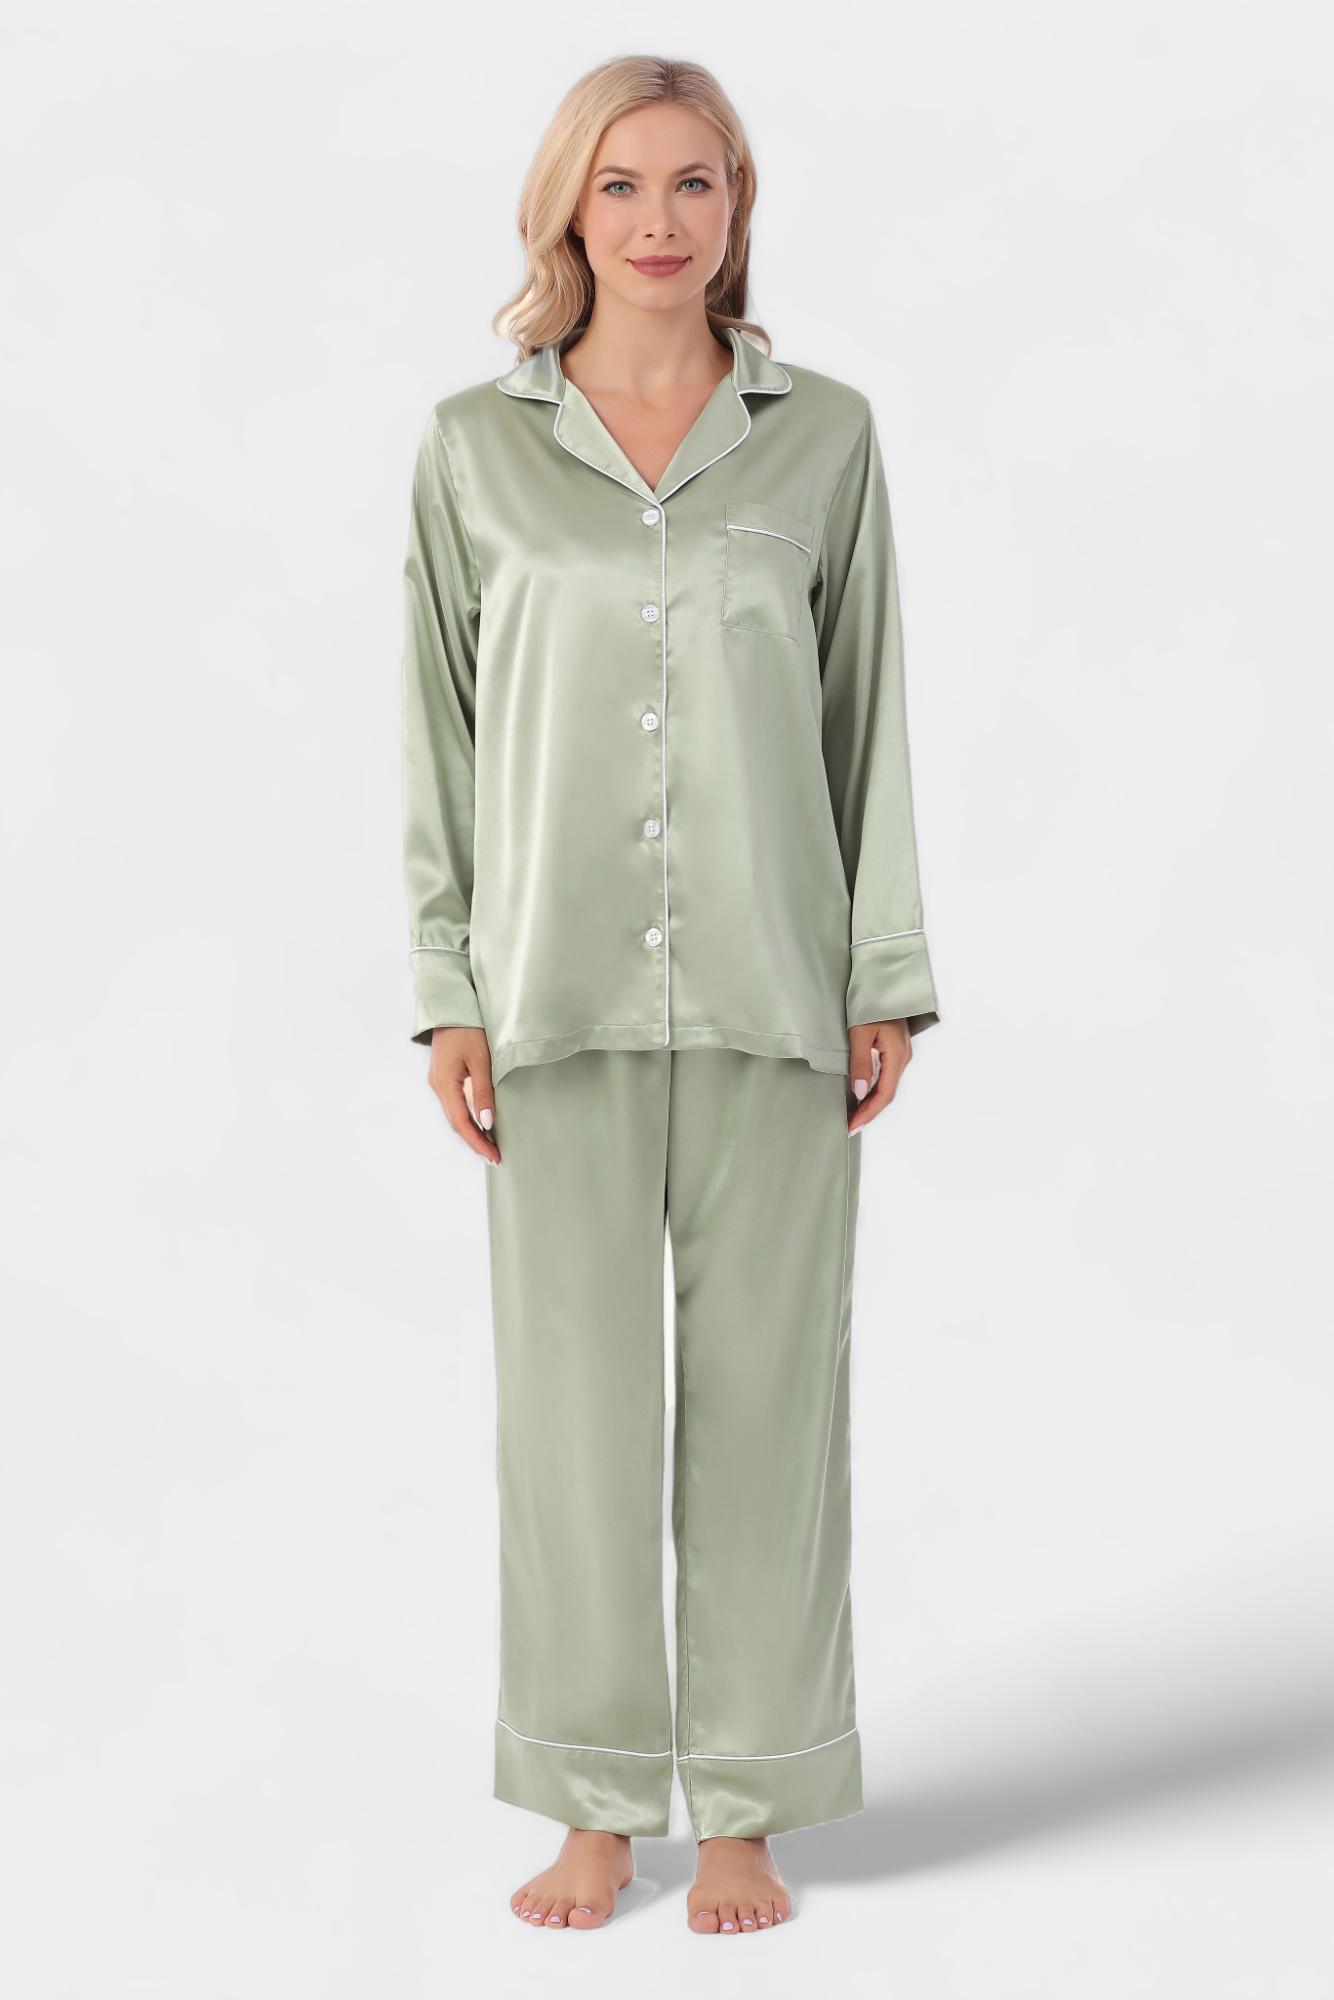 19 best washable silk pajama sets for women: Our review